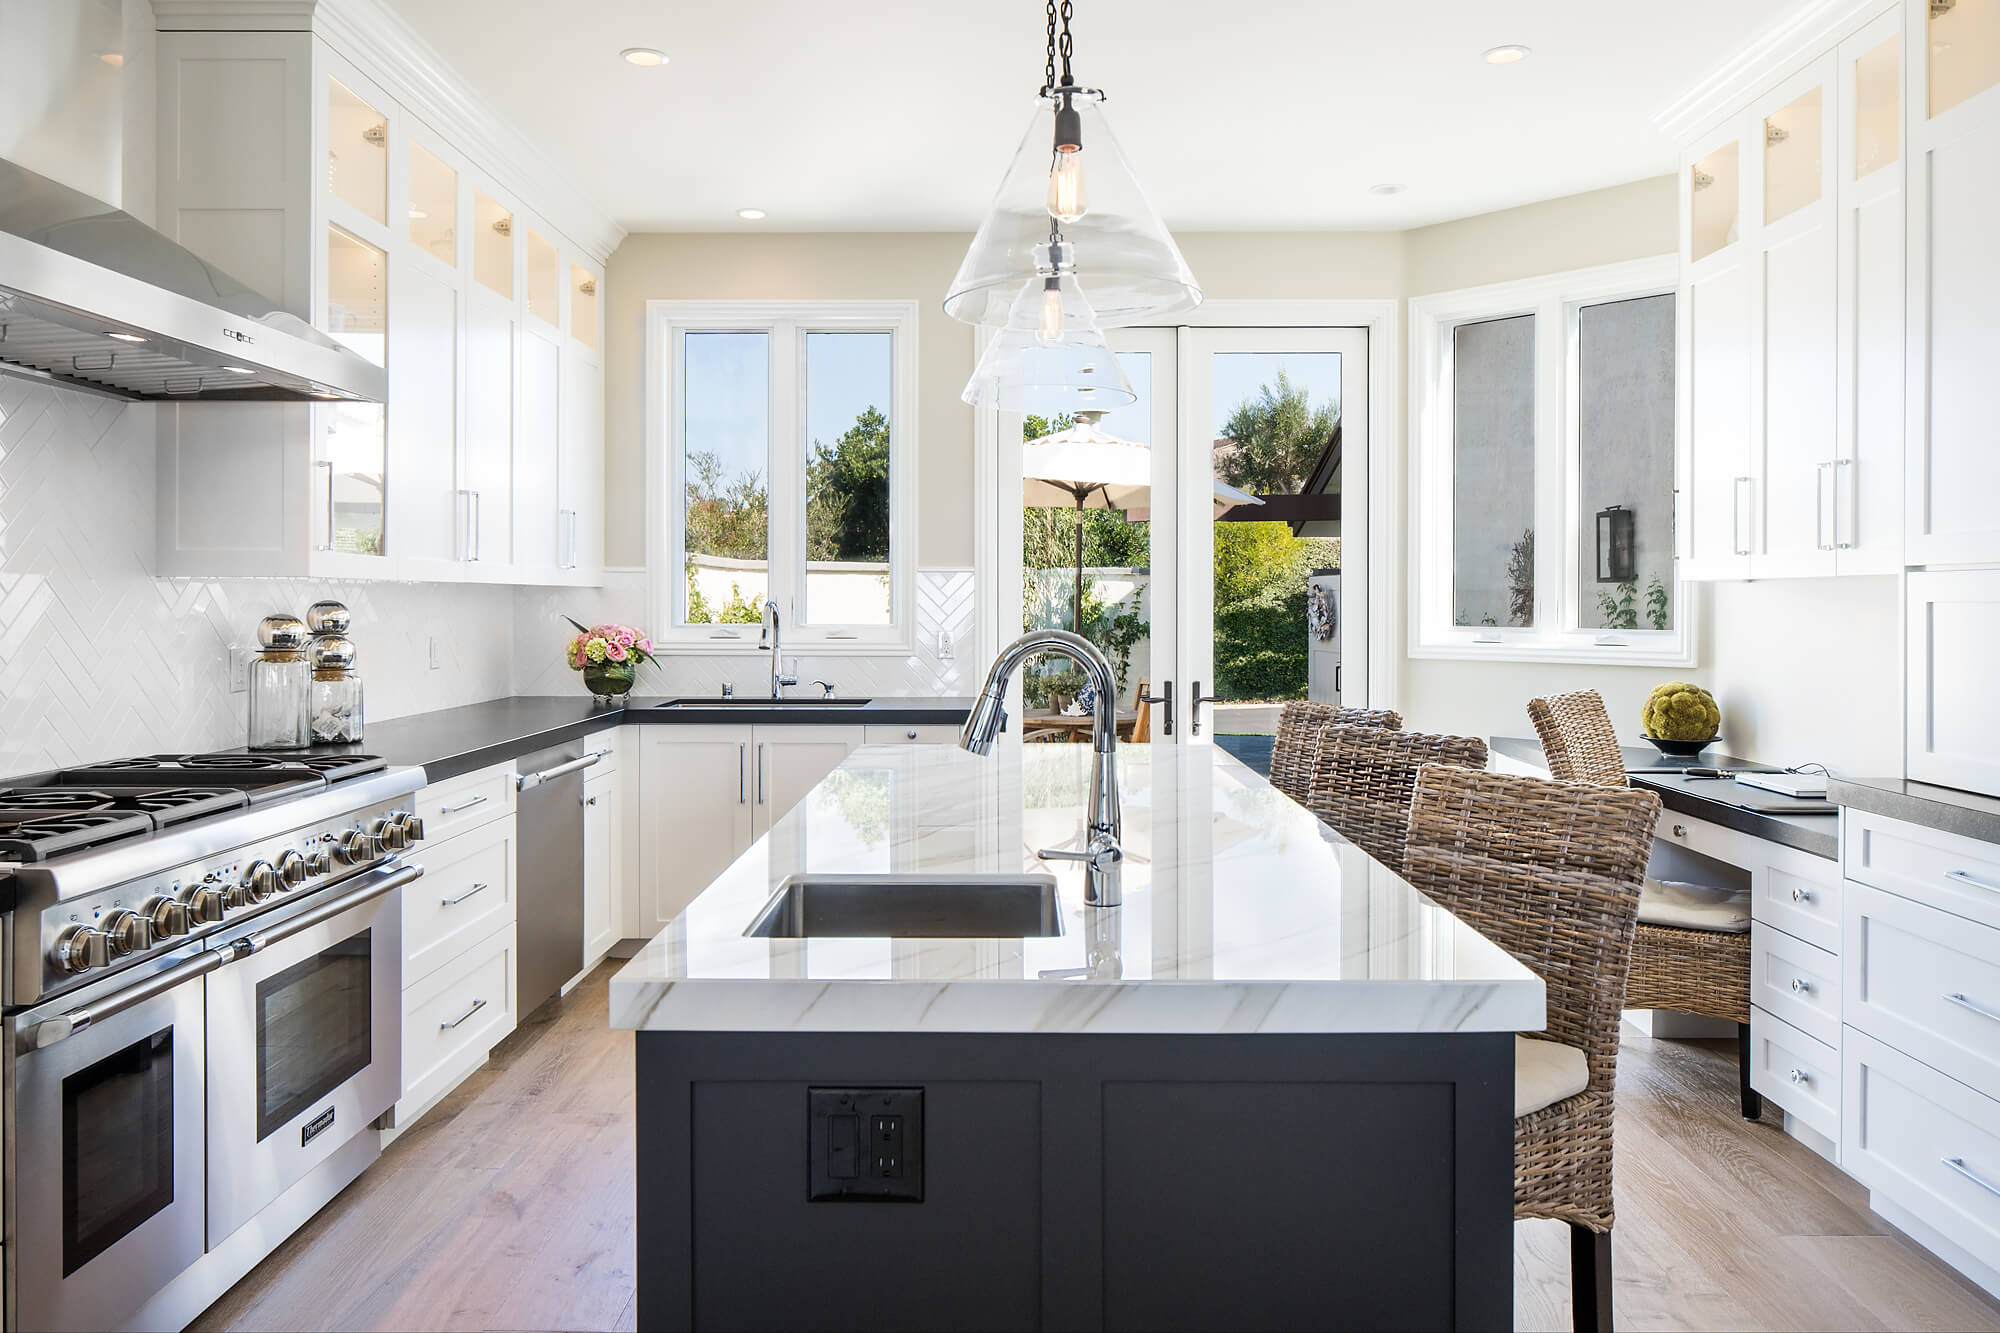 How much will my kitchen remodel cost? | Sea Pointe